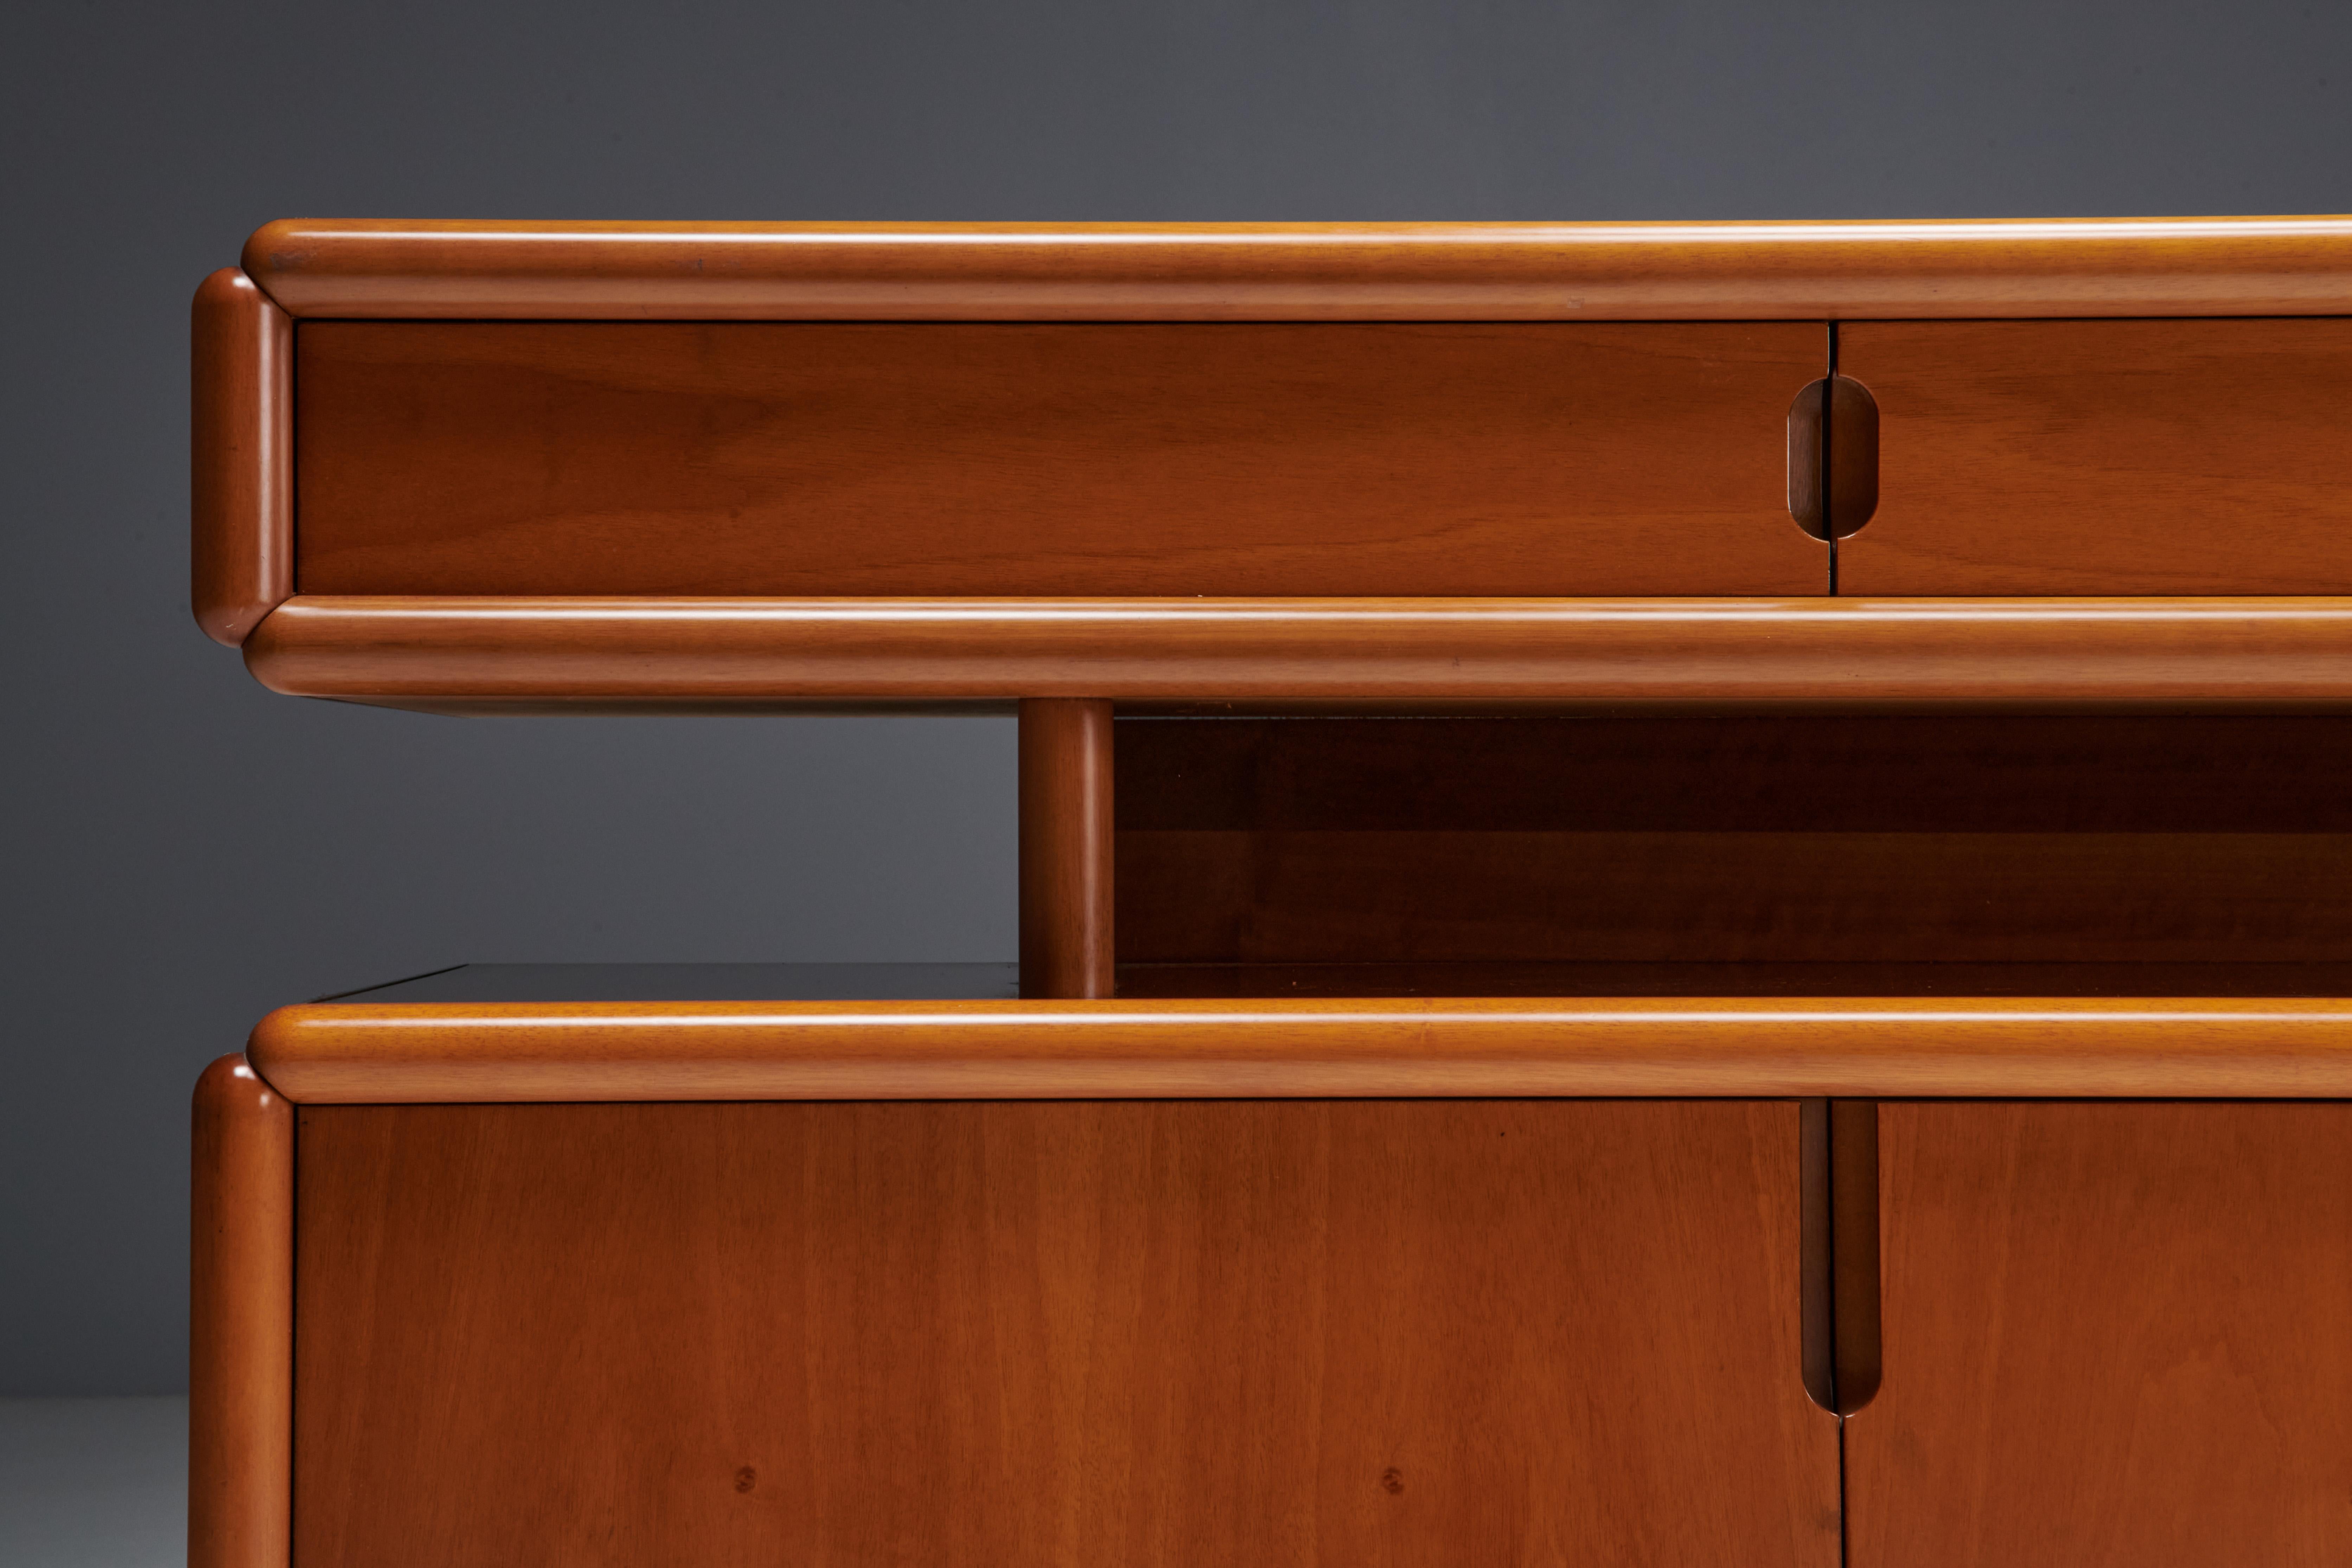 Postmodern Italian Sideboard in Canaletto Walnut, Italy, 1970s For Sale 5